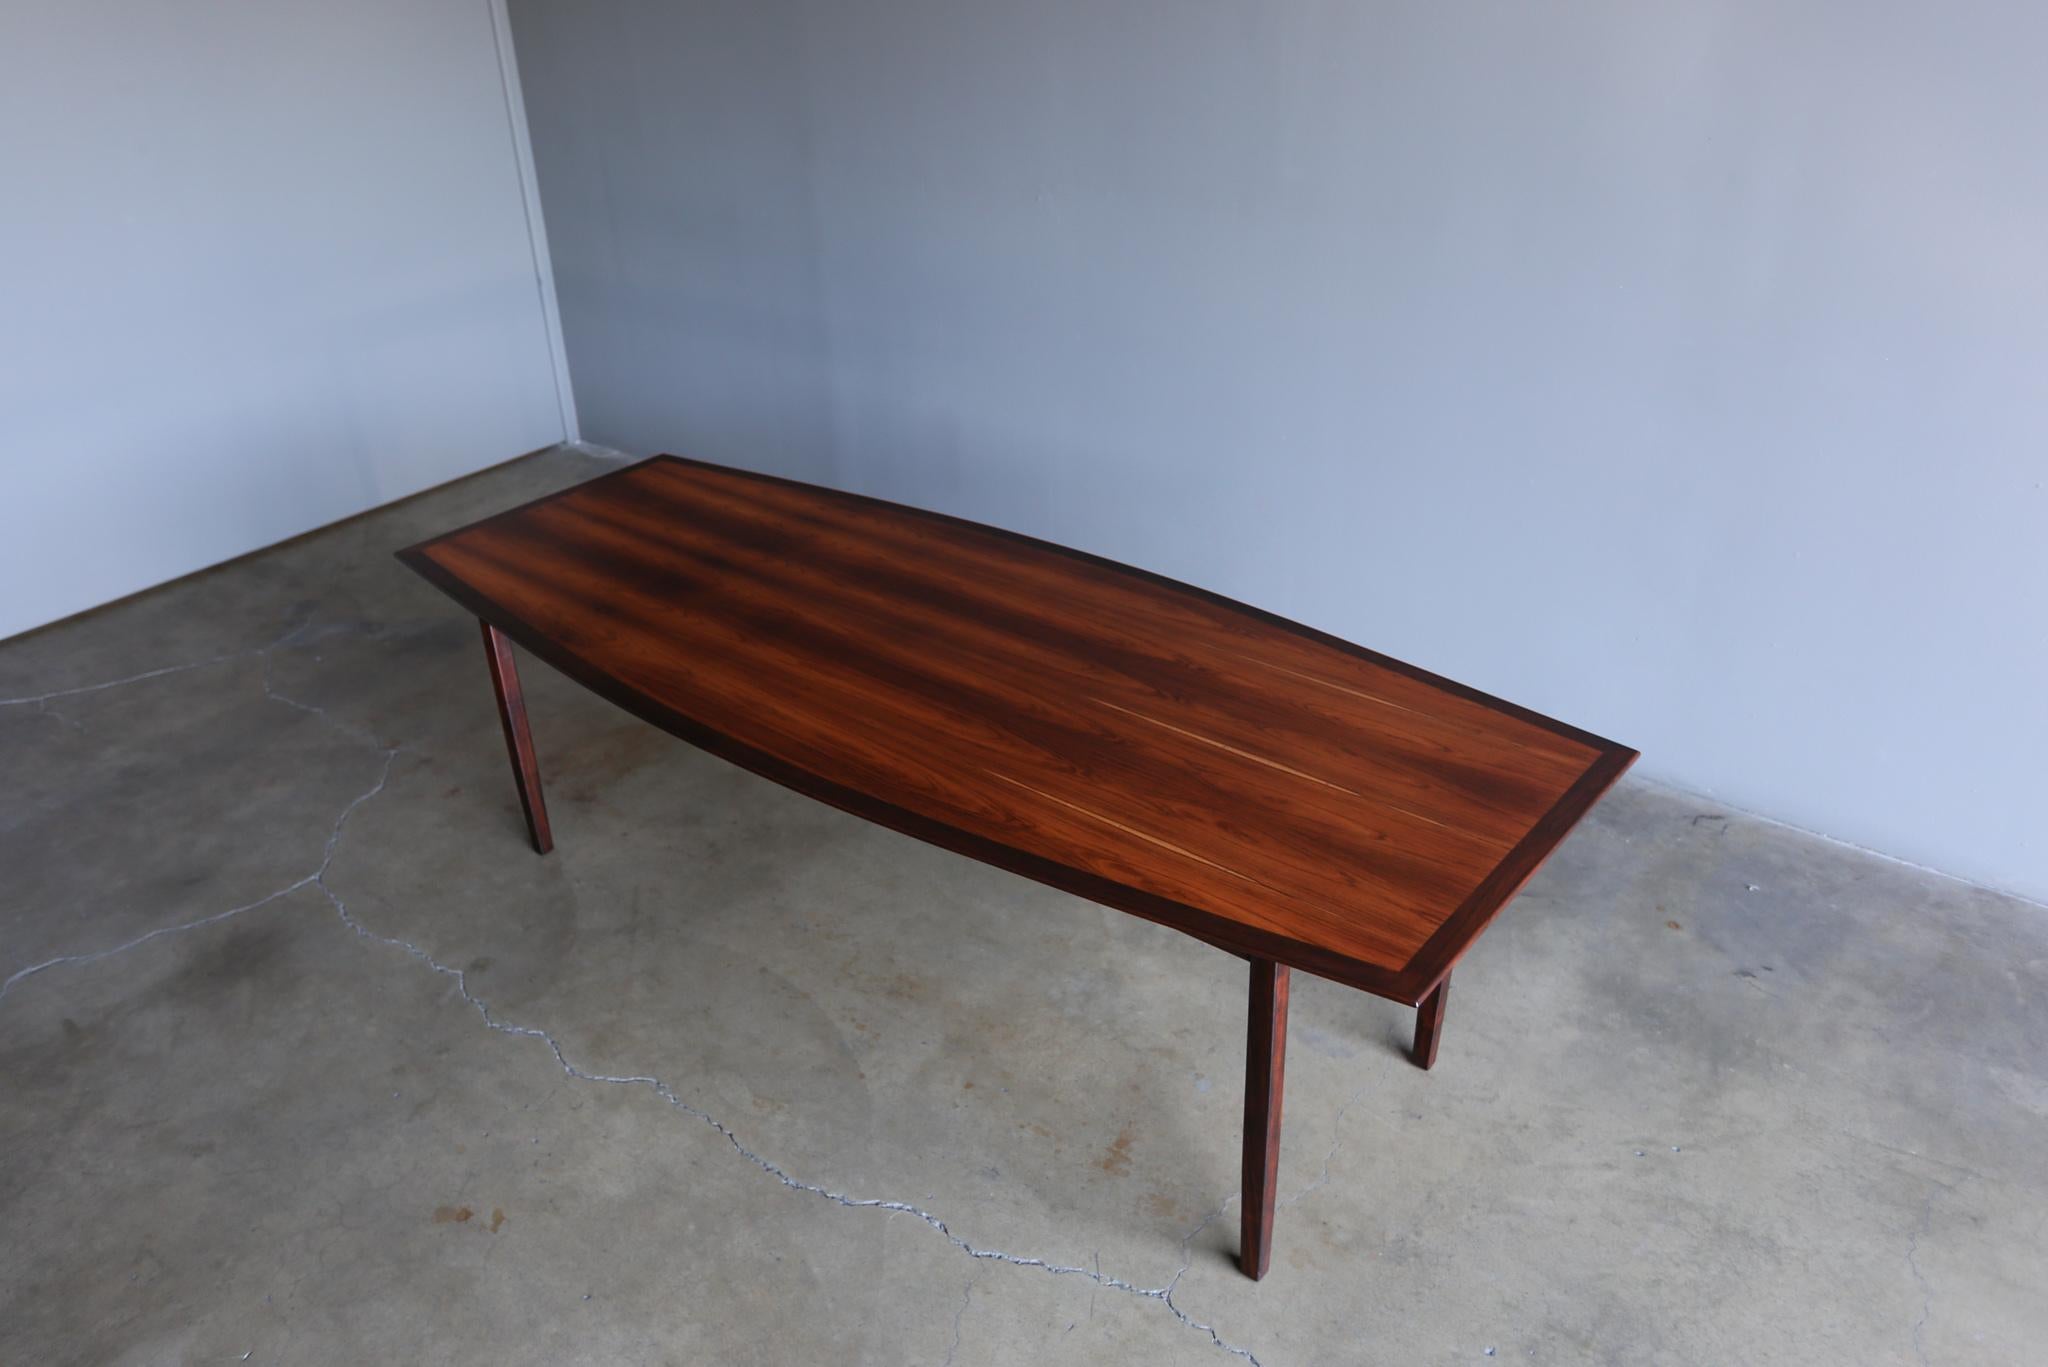 Florence Knoll Highly Figured Rosewood Boat Shaped Dining Table Distributed by FORMA Brazil,  circa 1960.  This table has been professionally restored.  